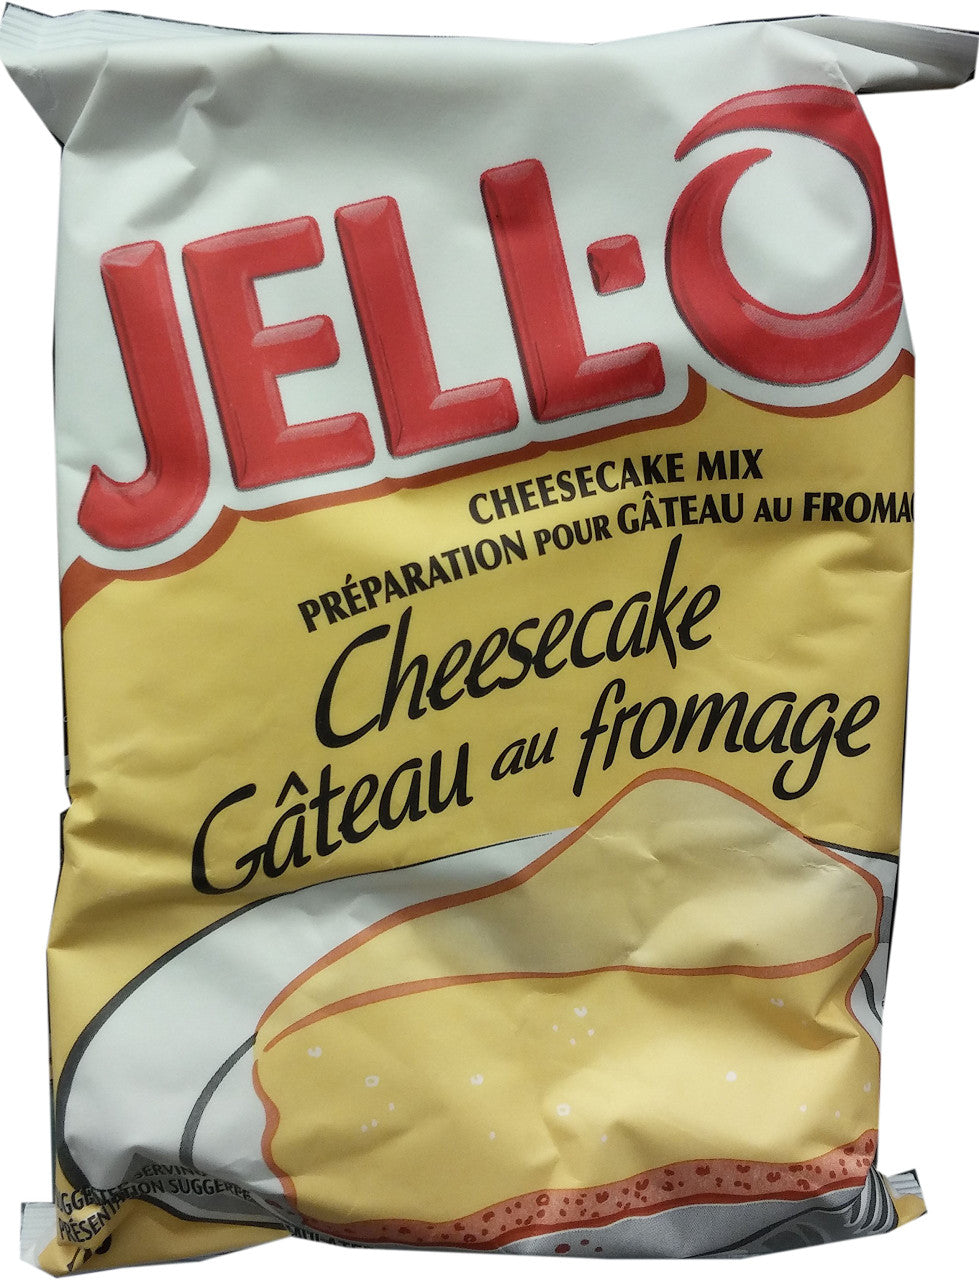 Jello Cheese Cake Mix, 1 kg/2.2lbs, Bag, {Imported from Canada}